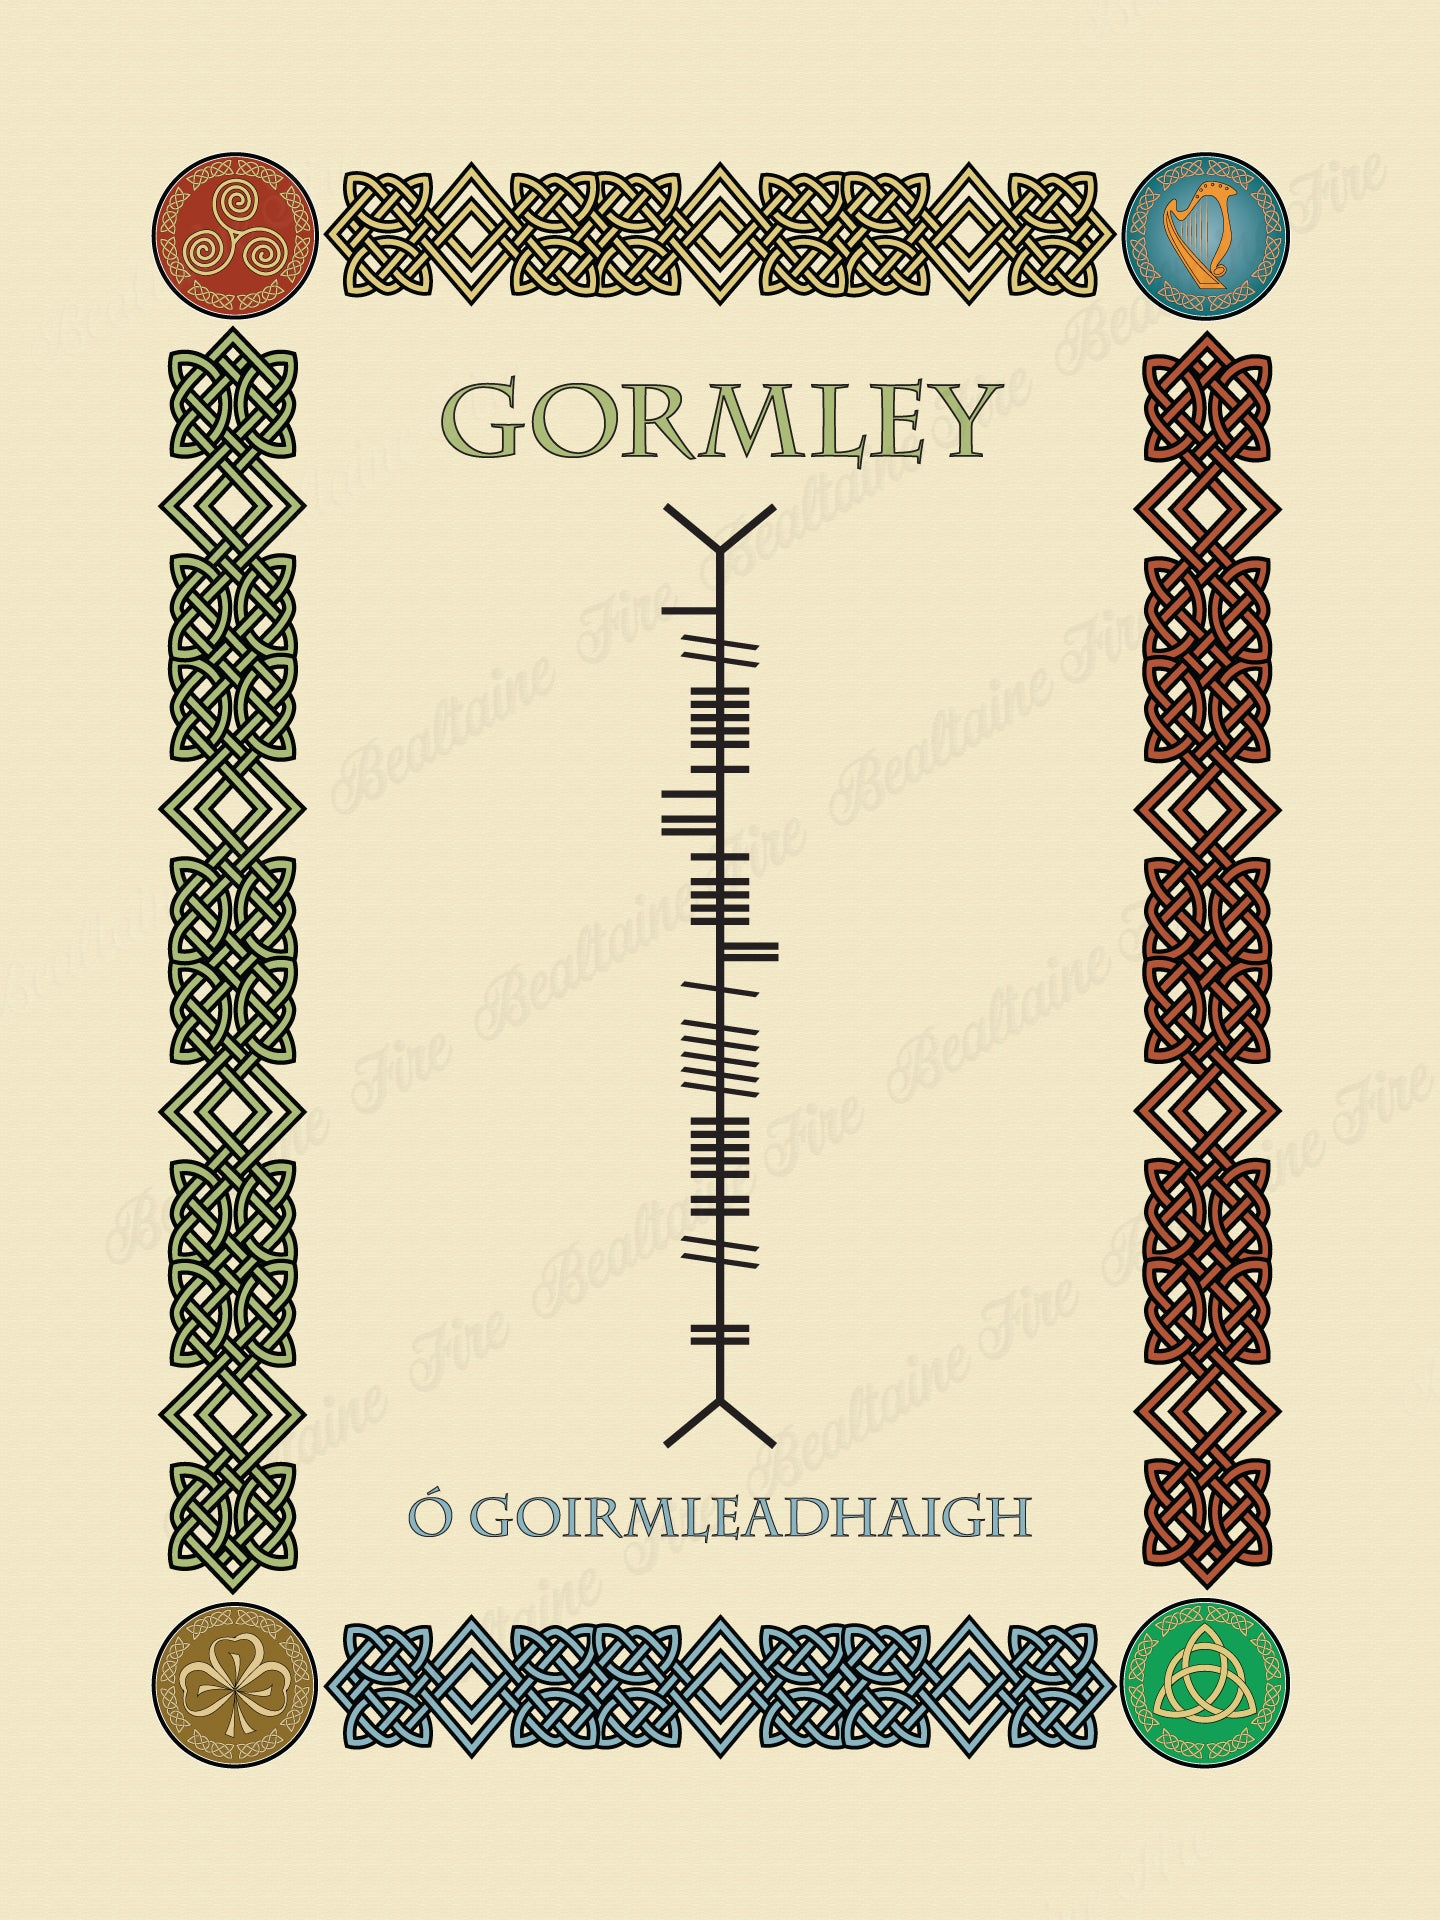 Gormley in Old Irish and Ogham - Premium luster unframed print